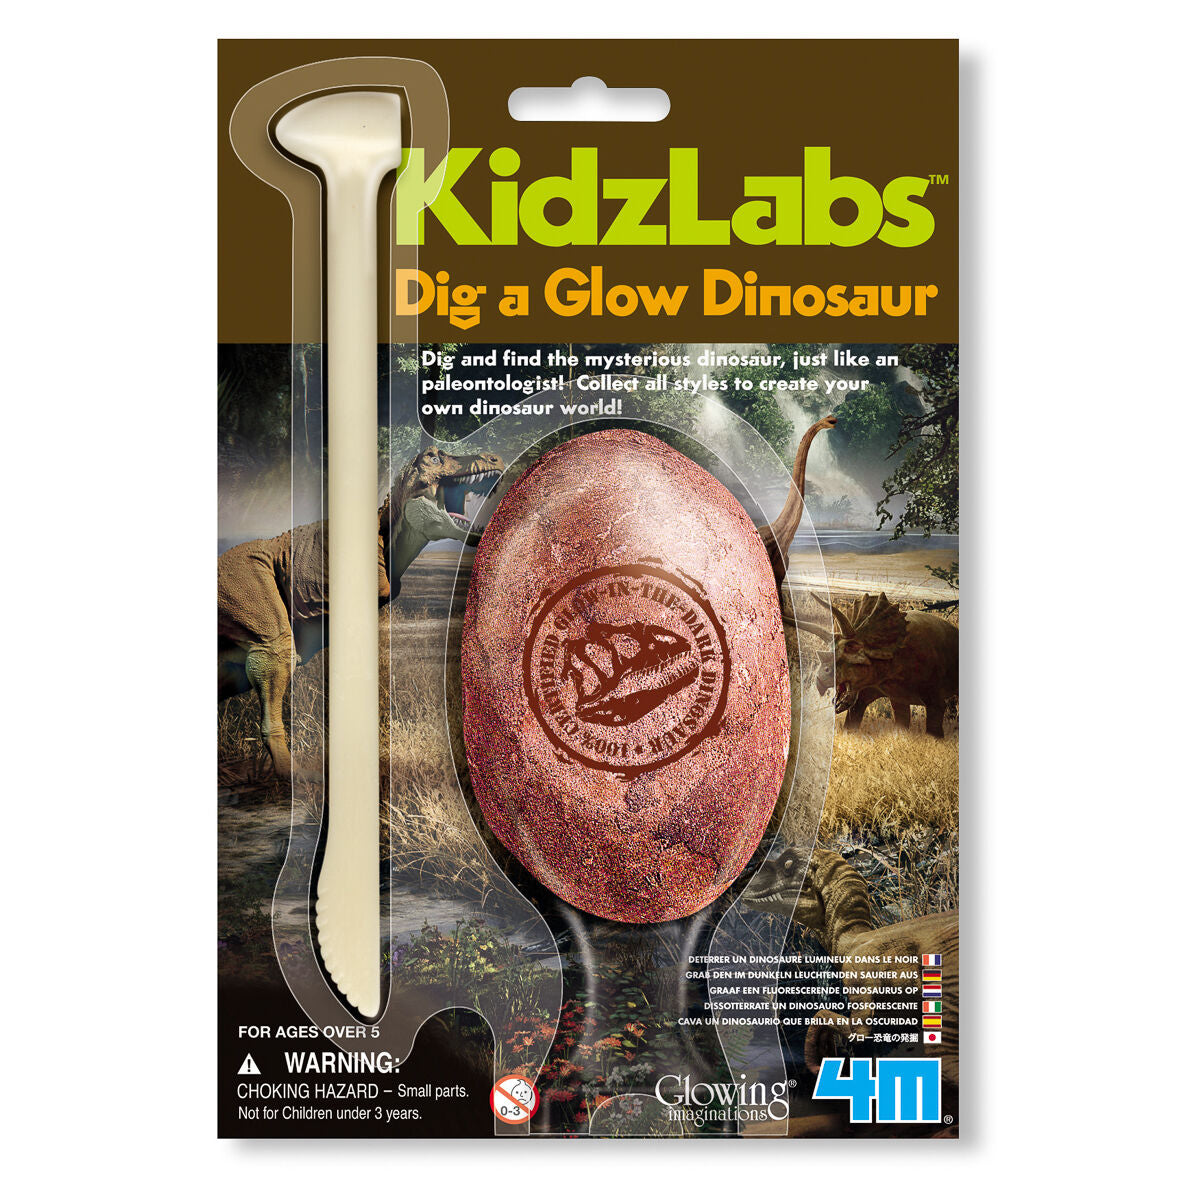 View the best prices for: 4m kidzlabs dig a glow dinosaur